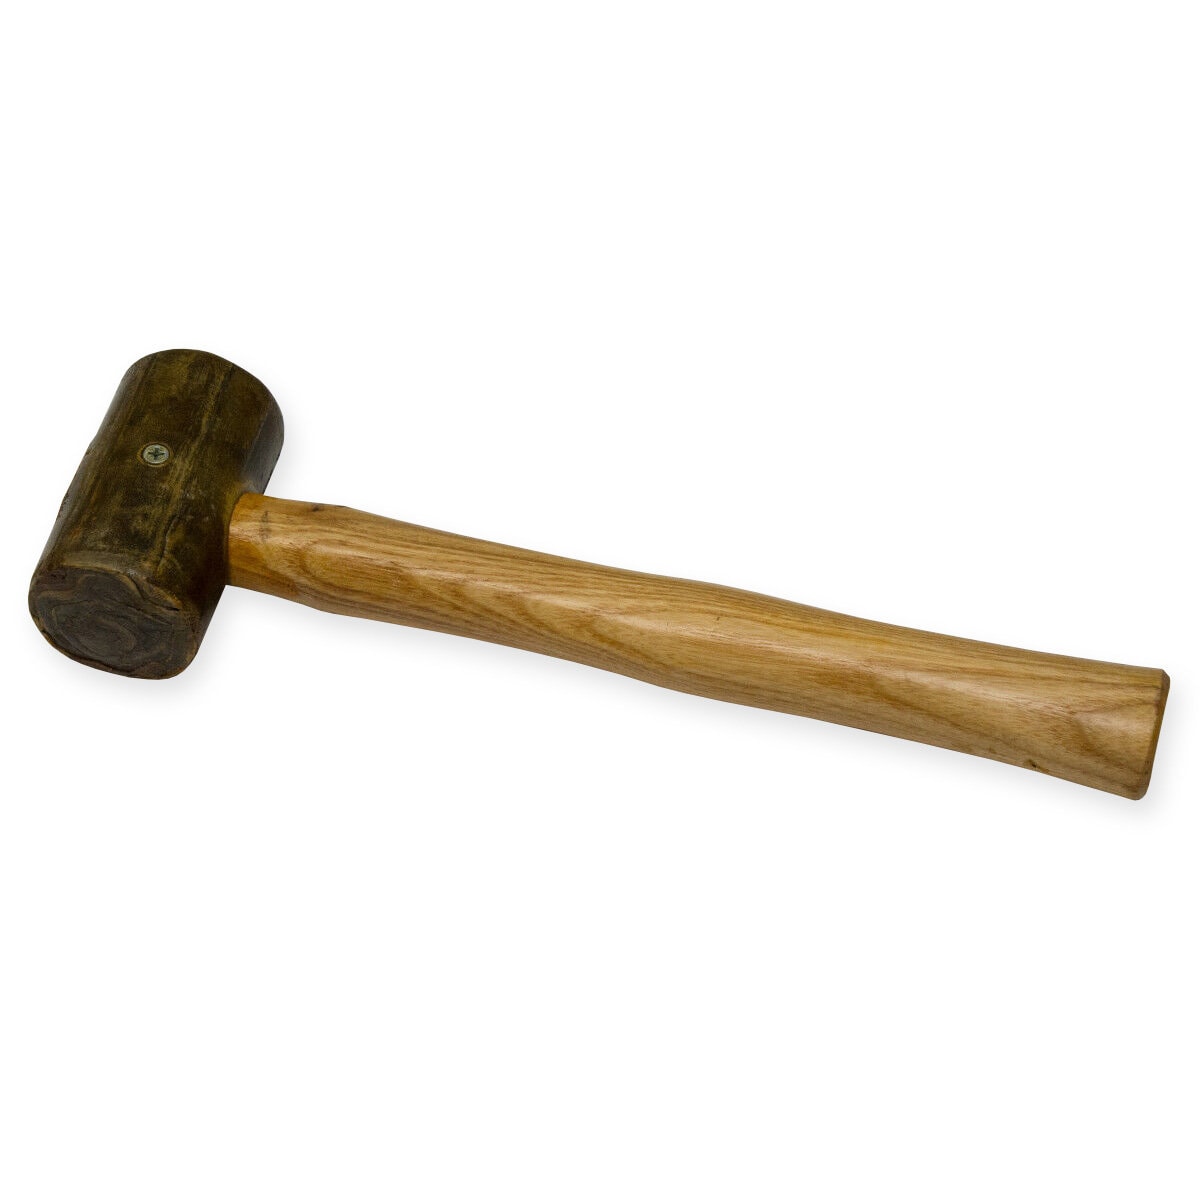 2 Pcs Leather Carving Hammer,Leather Mallet,Wooden Handle Nylon  Hammer,Leather Tools for Handmade DIY Leather Work 